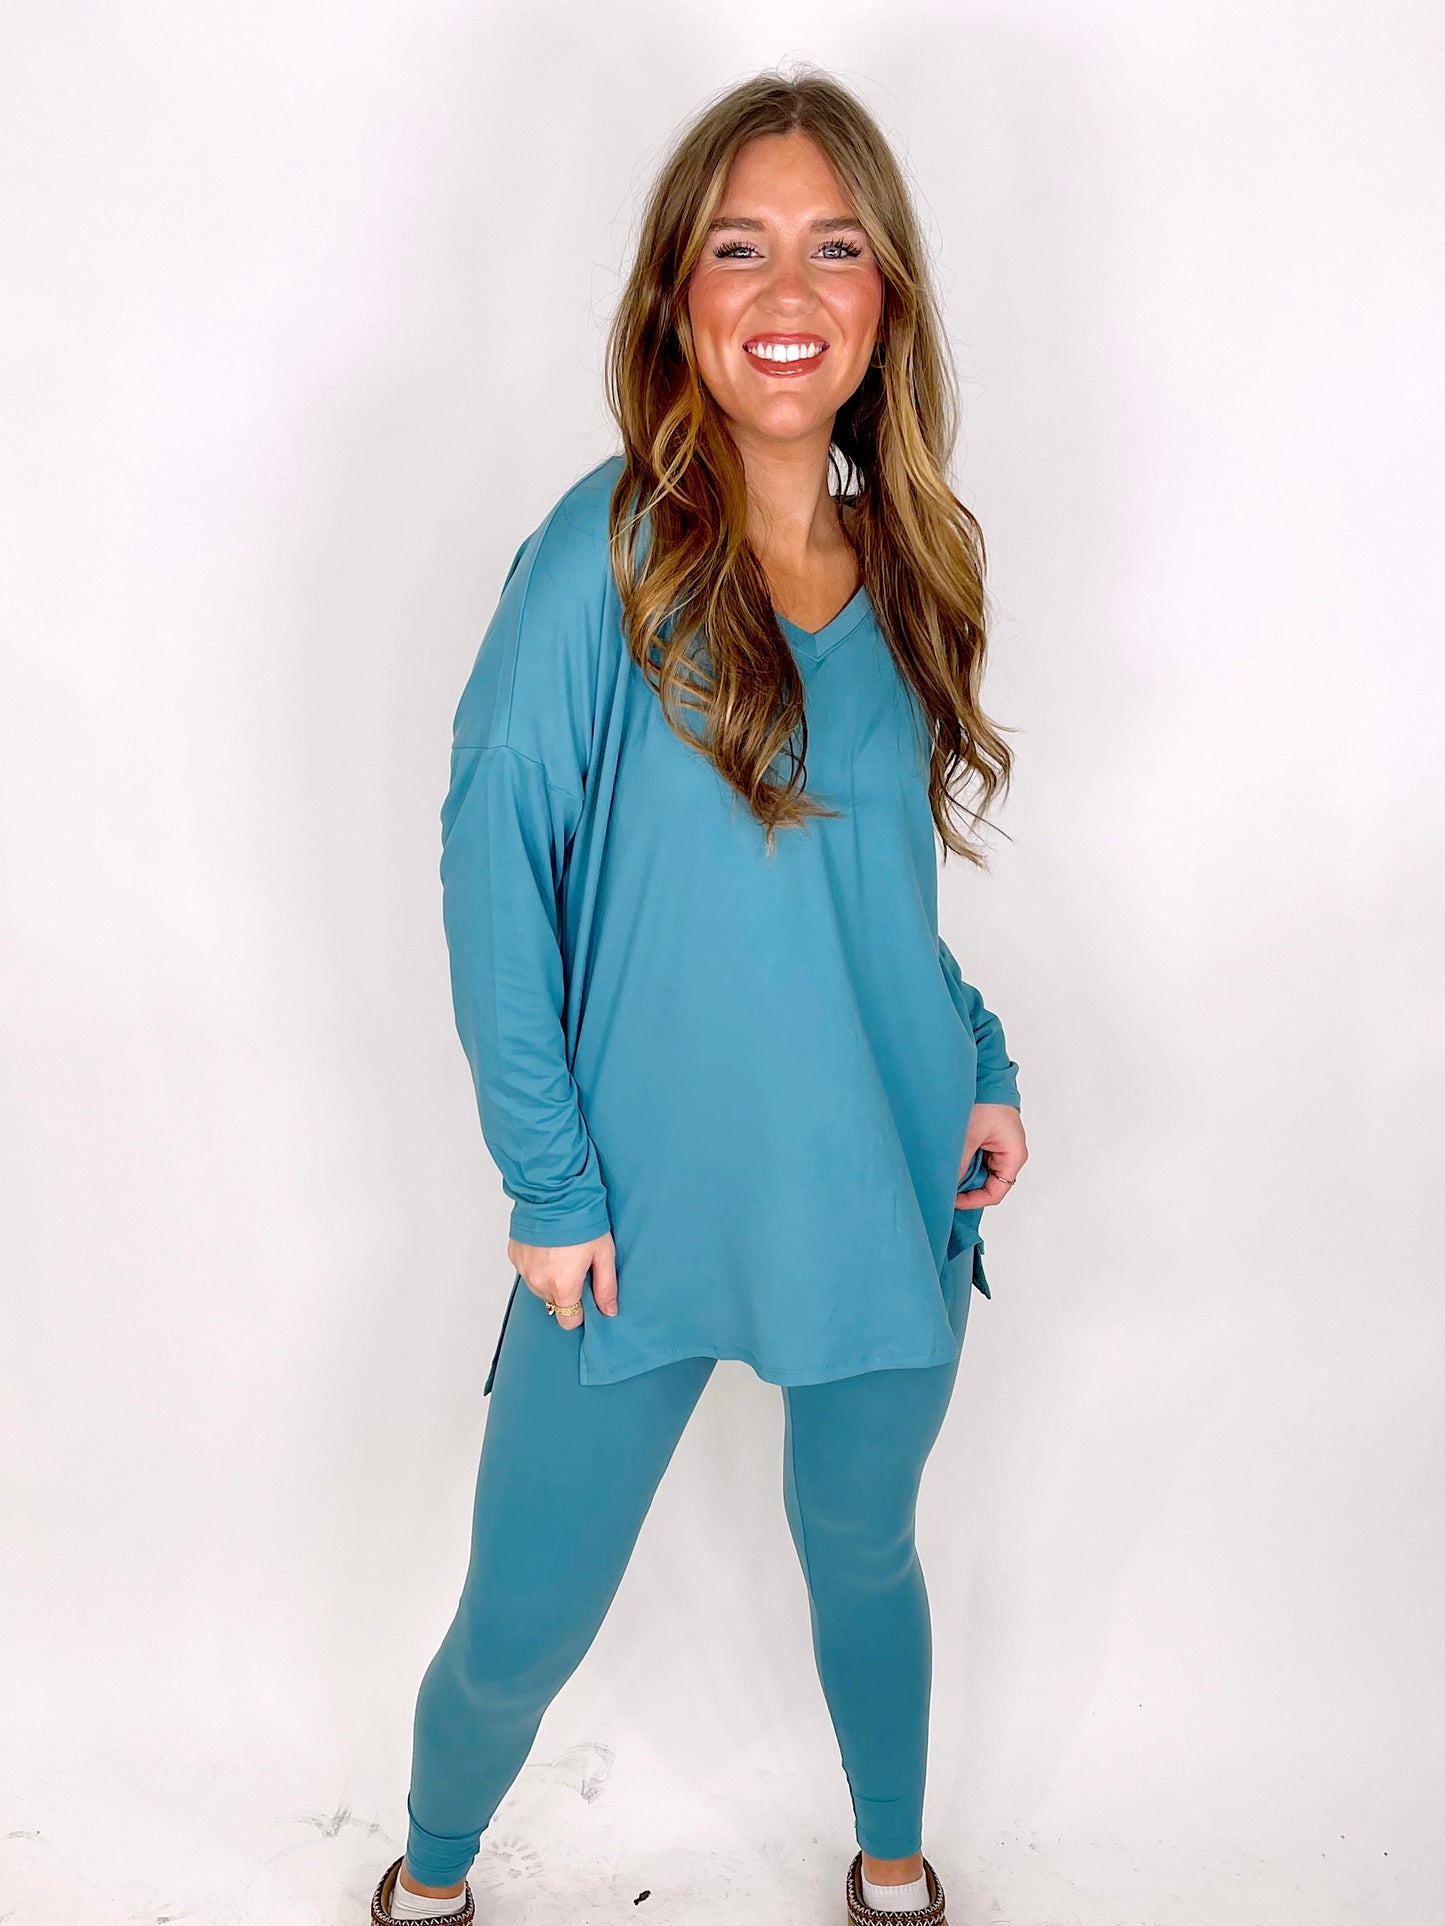 Let's Get Cozy Lounge Set | DOORBUSTER-Matching Set-Zenana-The Village Shoppe, Women’s Fashion Boutique, Shop Online and In Store - Located in Muscle Shoals, AL.